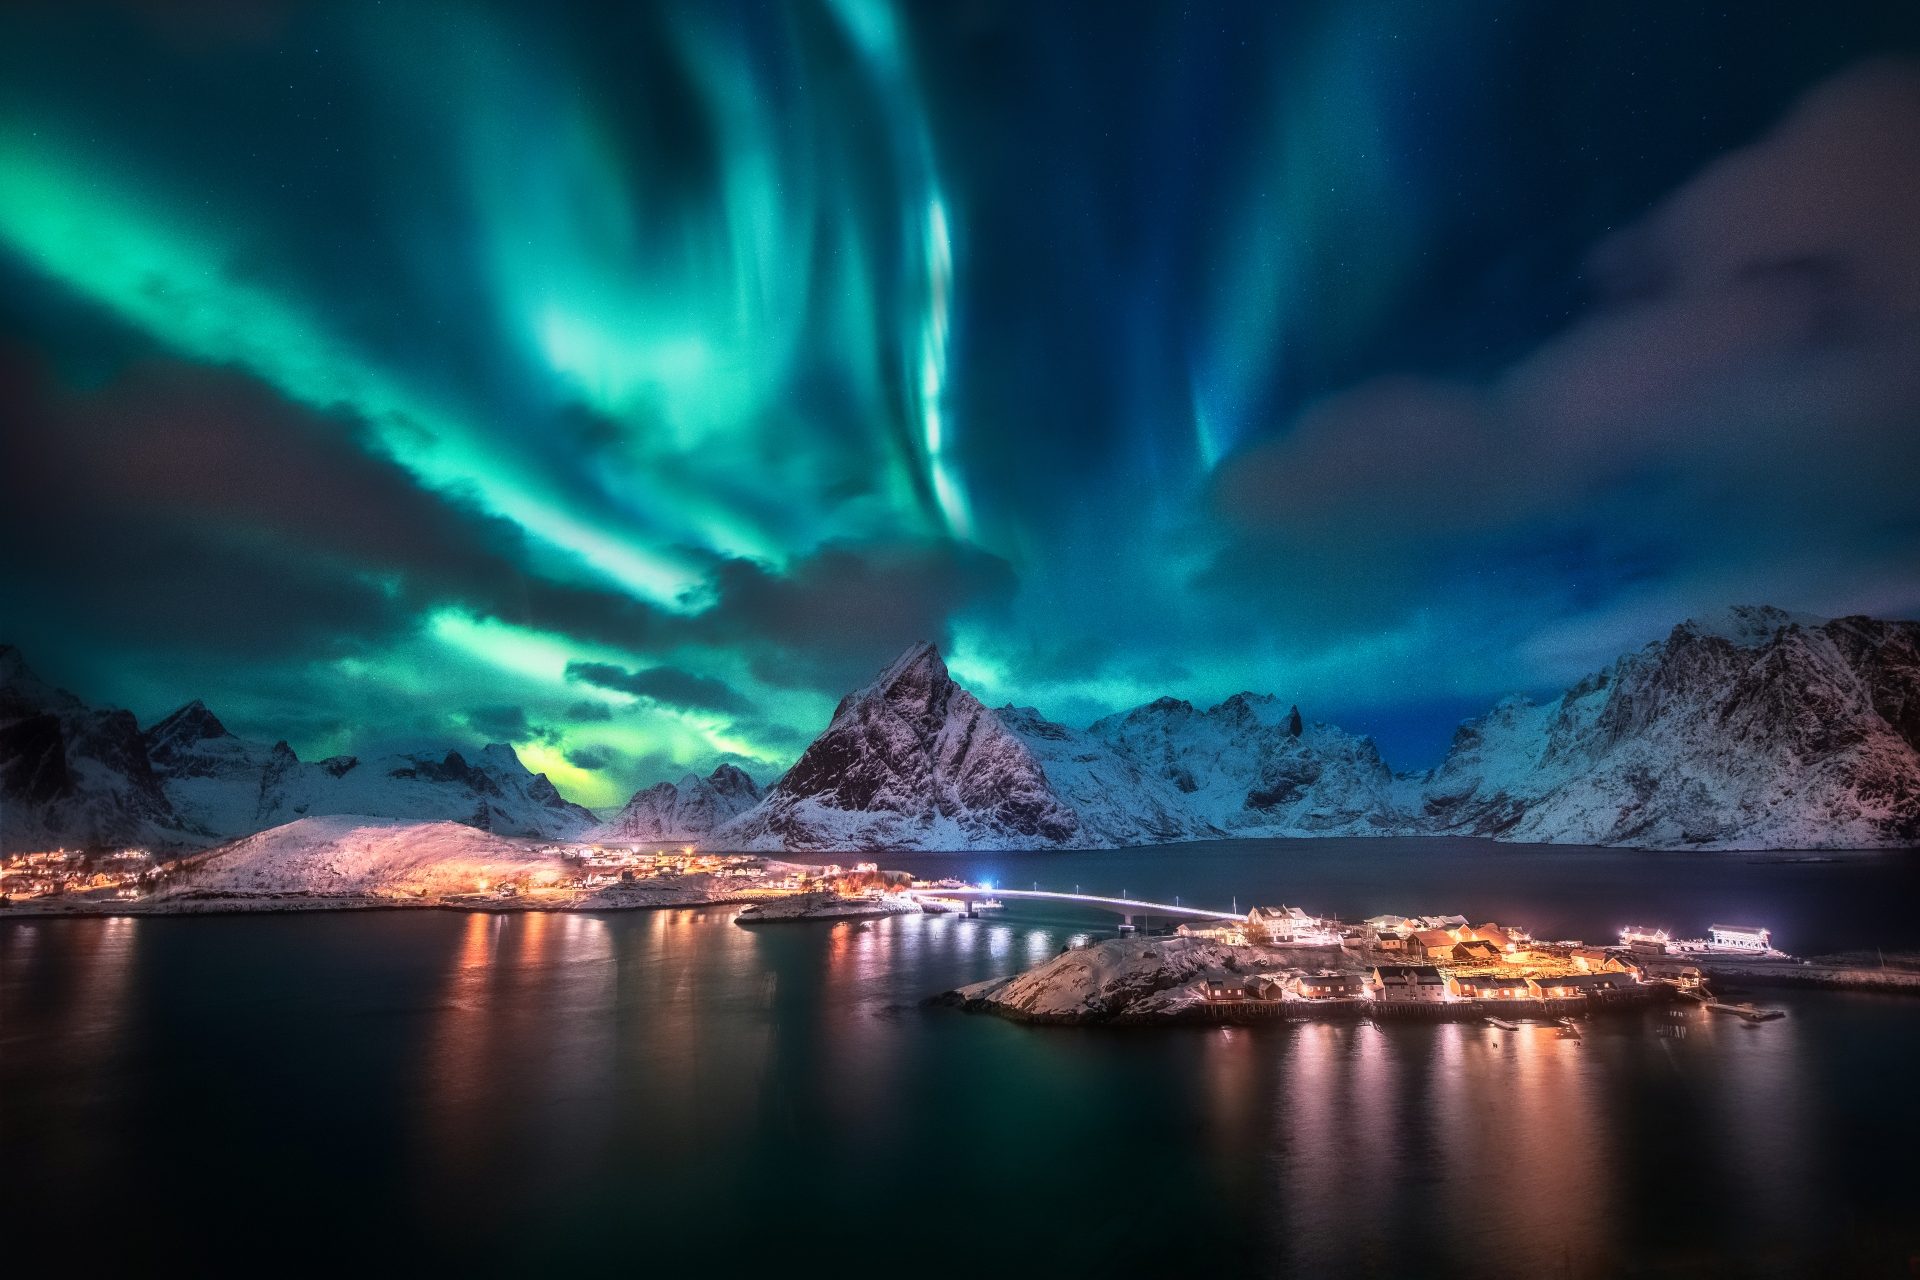 The best places in the world to enjoy the Northern Lights (aurora borealis)